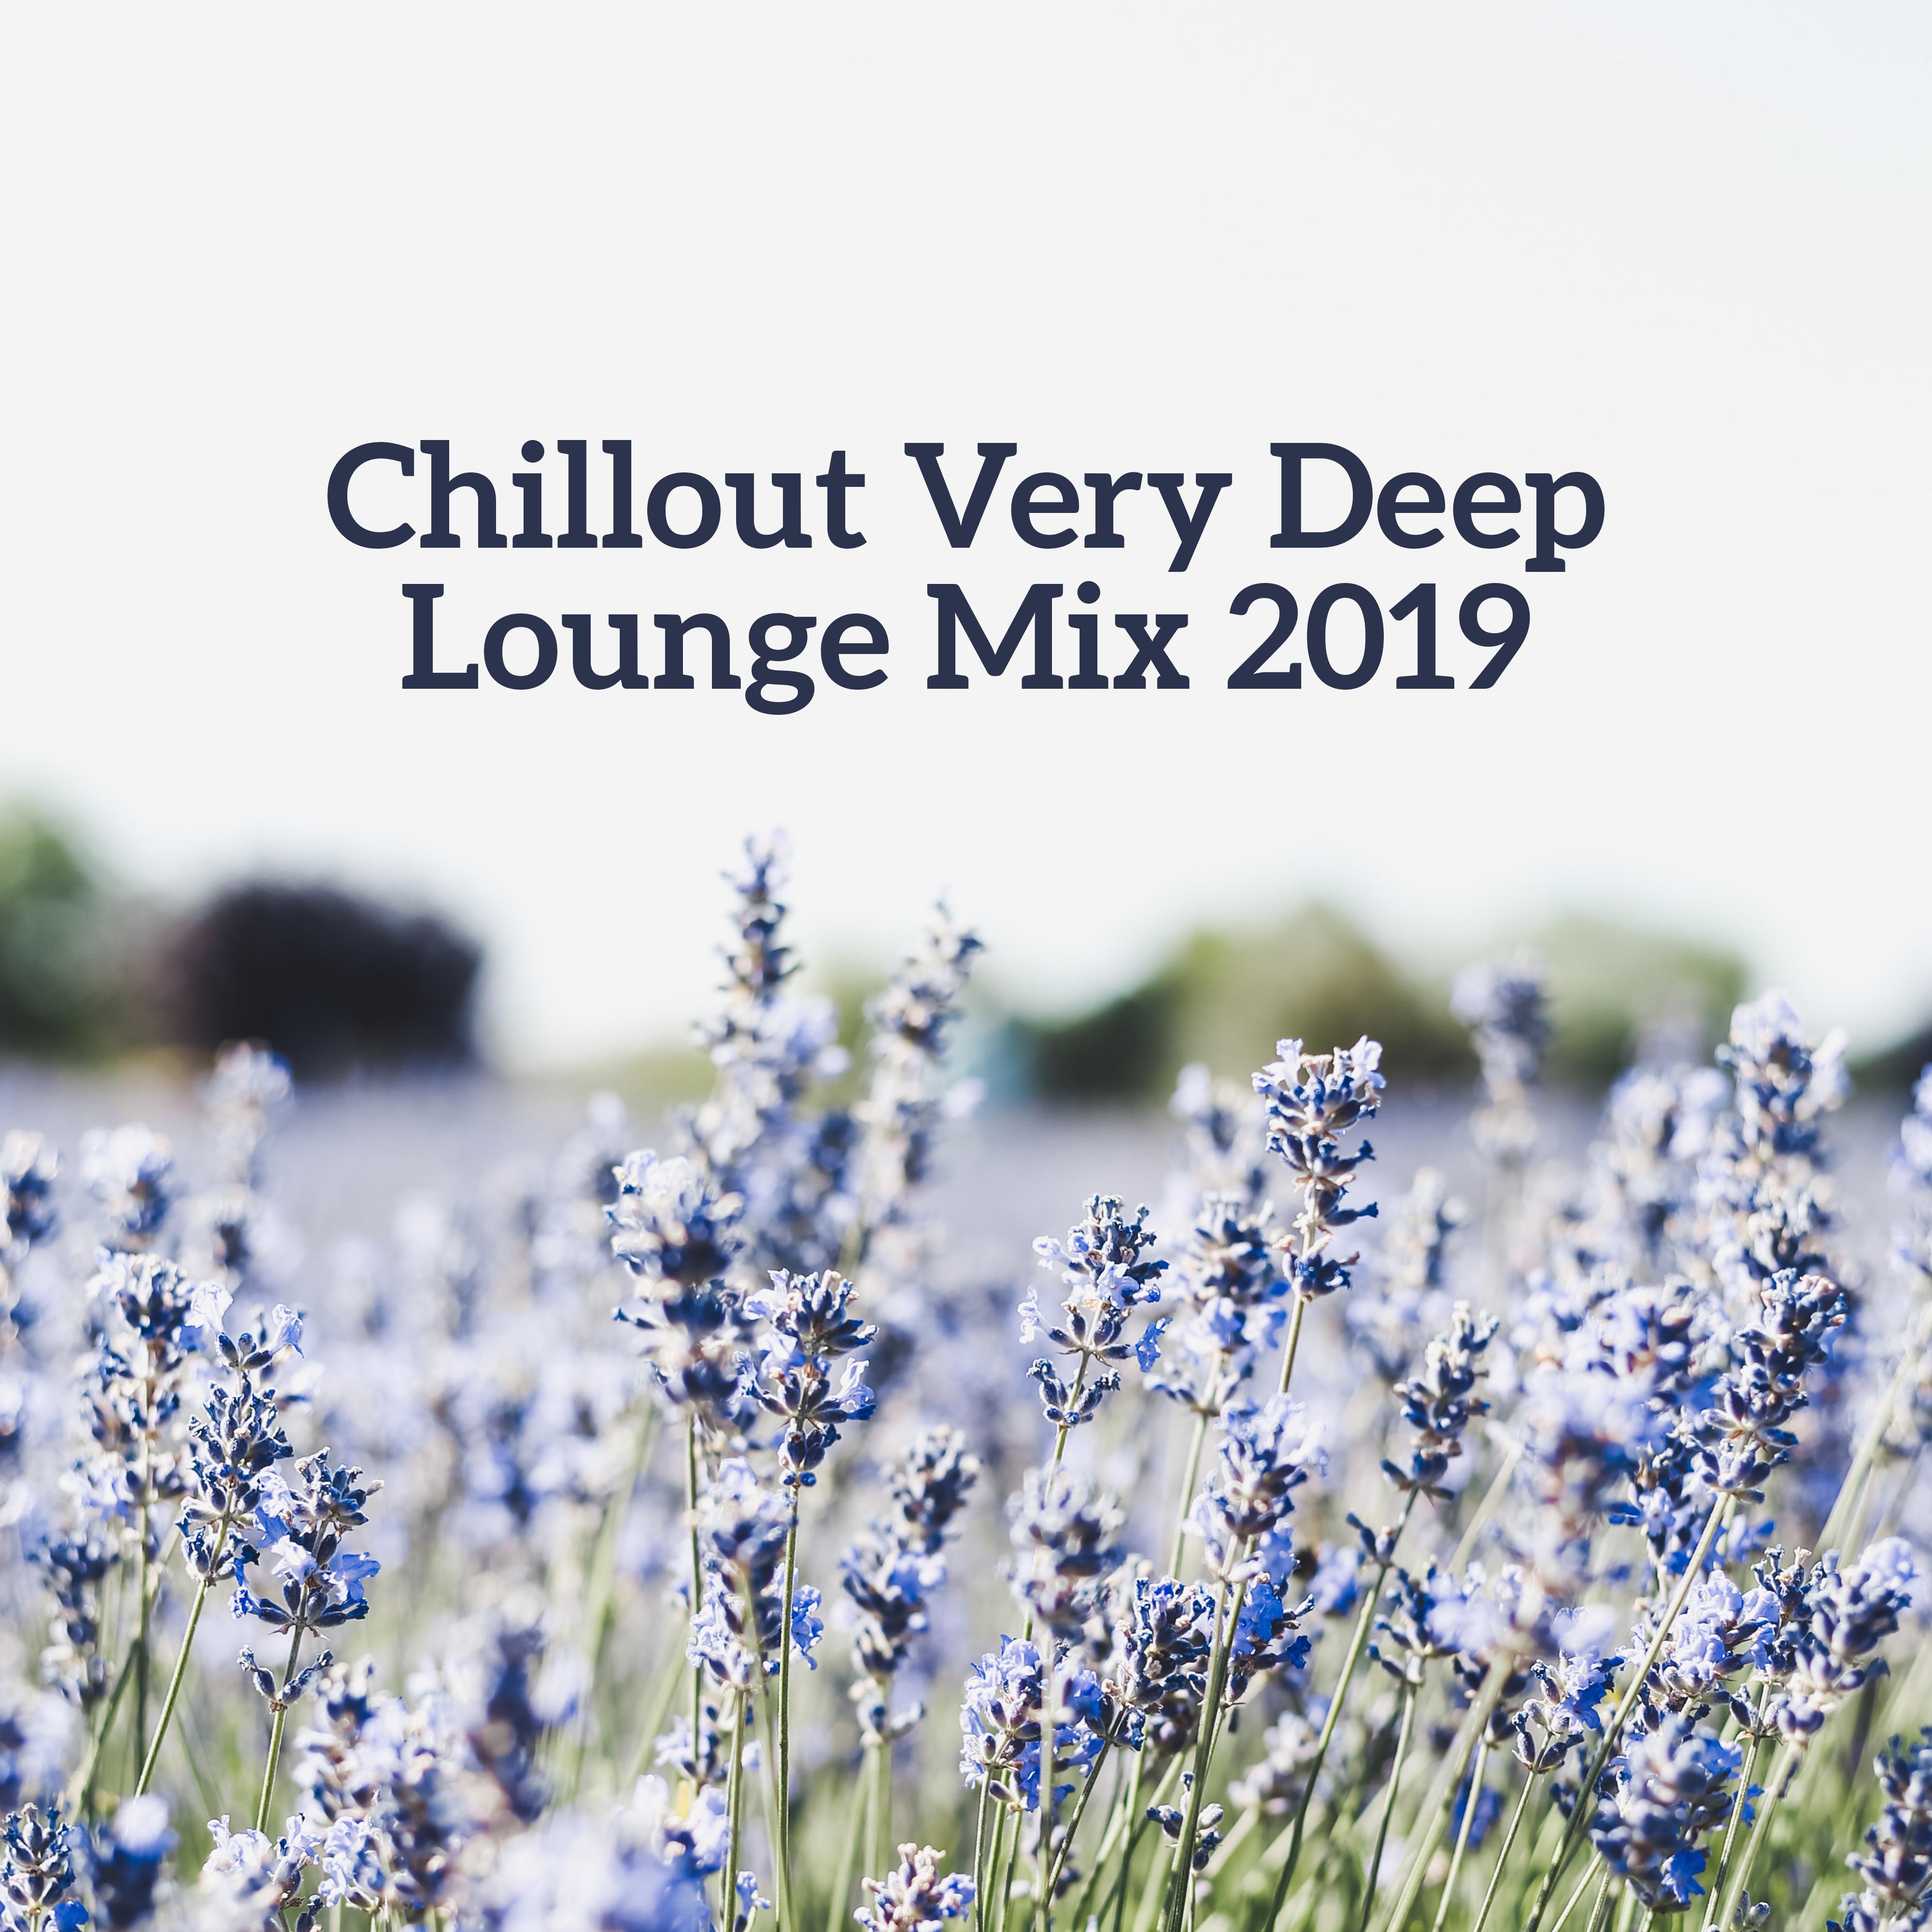 Chillout Very Deep Lounge Mix 2019  Selection of Best Ambient Chill Out Music, Soft Melodies  Deep Beats, Moments of Total Calm, Relaxing Summer 2019